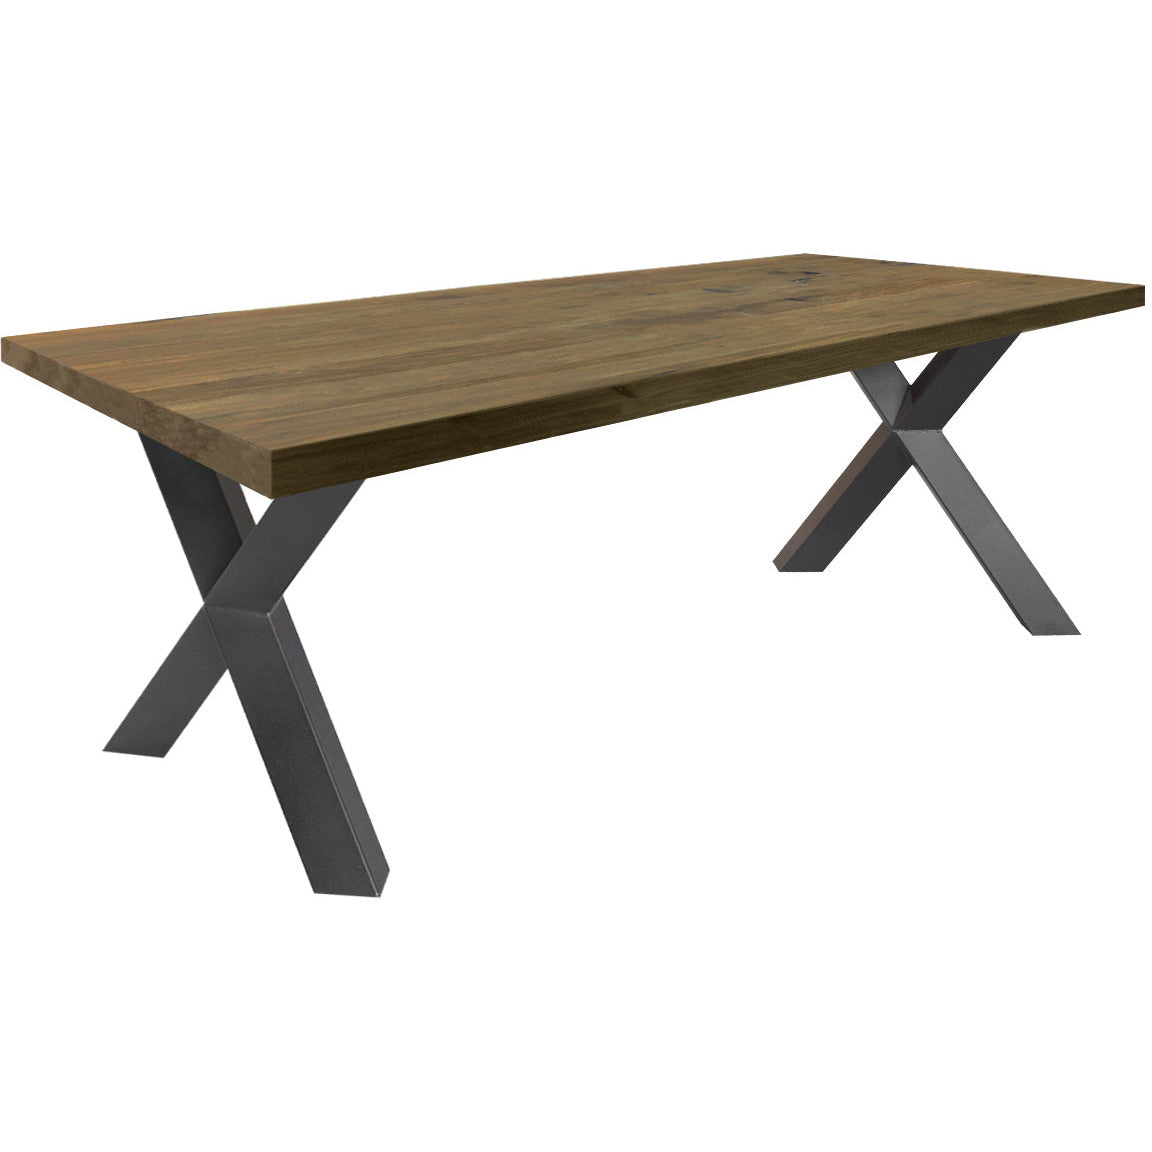 Dining table | Rectangle | Warm brown | Oak wood | Lacquered | X-paw